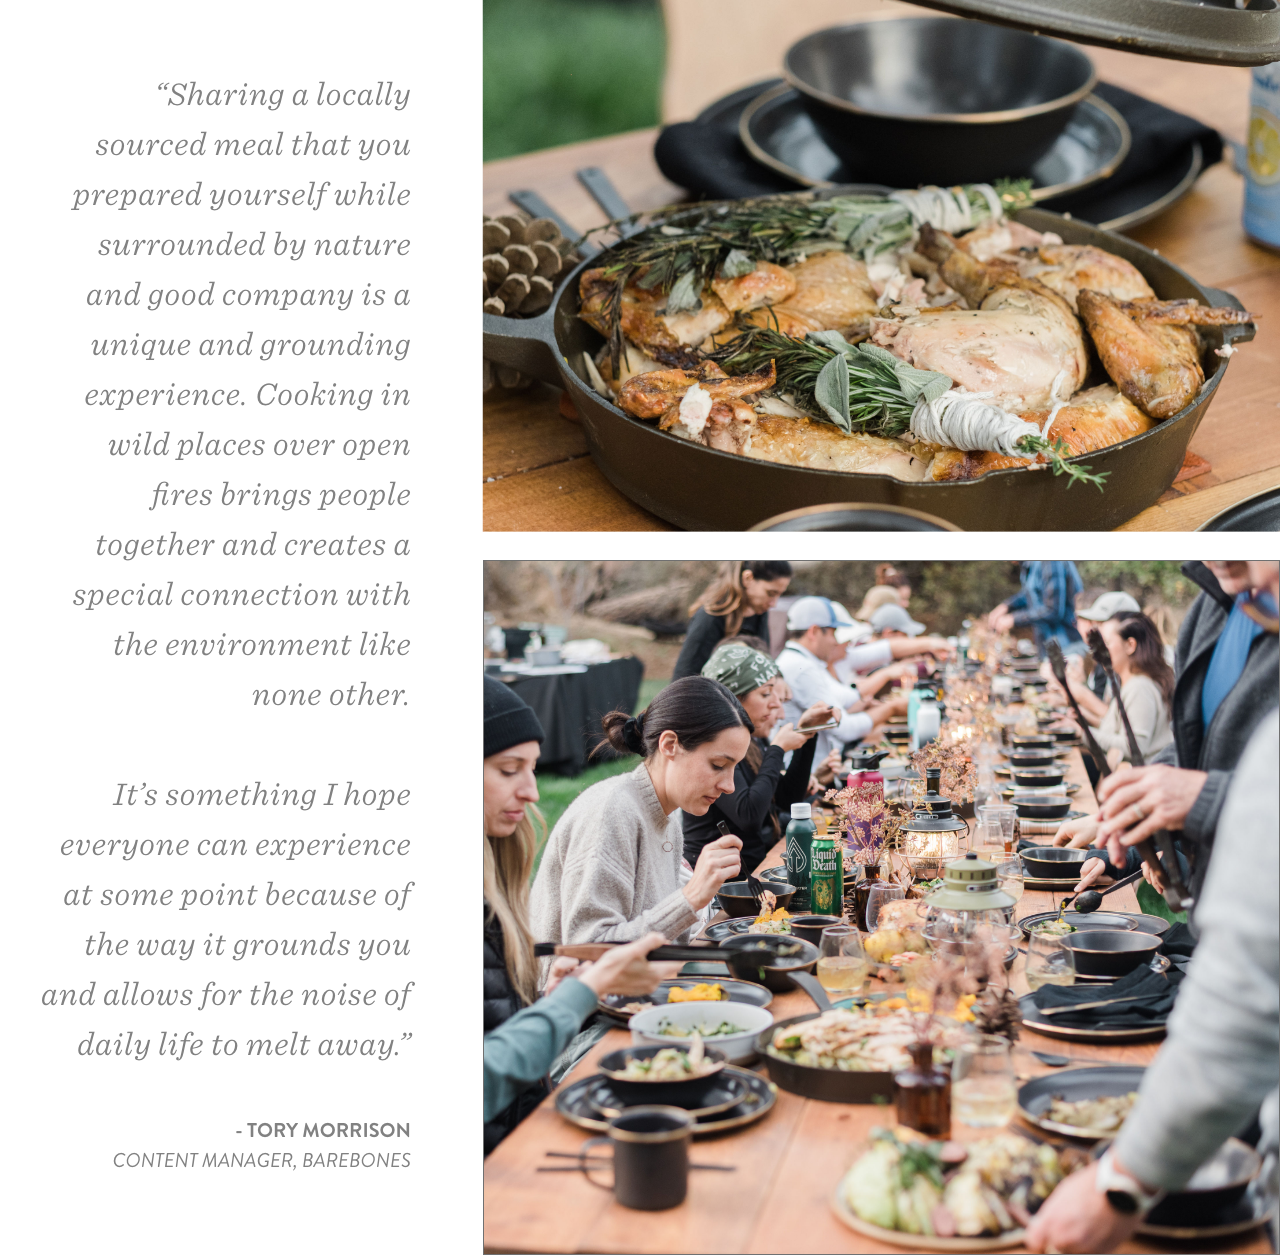 “Sharing a locally sourced meal that you prepared yourself while surrounded by nature and good company is a unique and grounding experience. Cooking in wild places over open fires brings people together and creates a special connection with the environment like none other.  It’s something I hope everyone can experience at some point because of the way it grounds you and allows for the noise of daily life to melt away.”